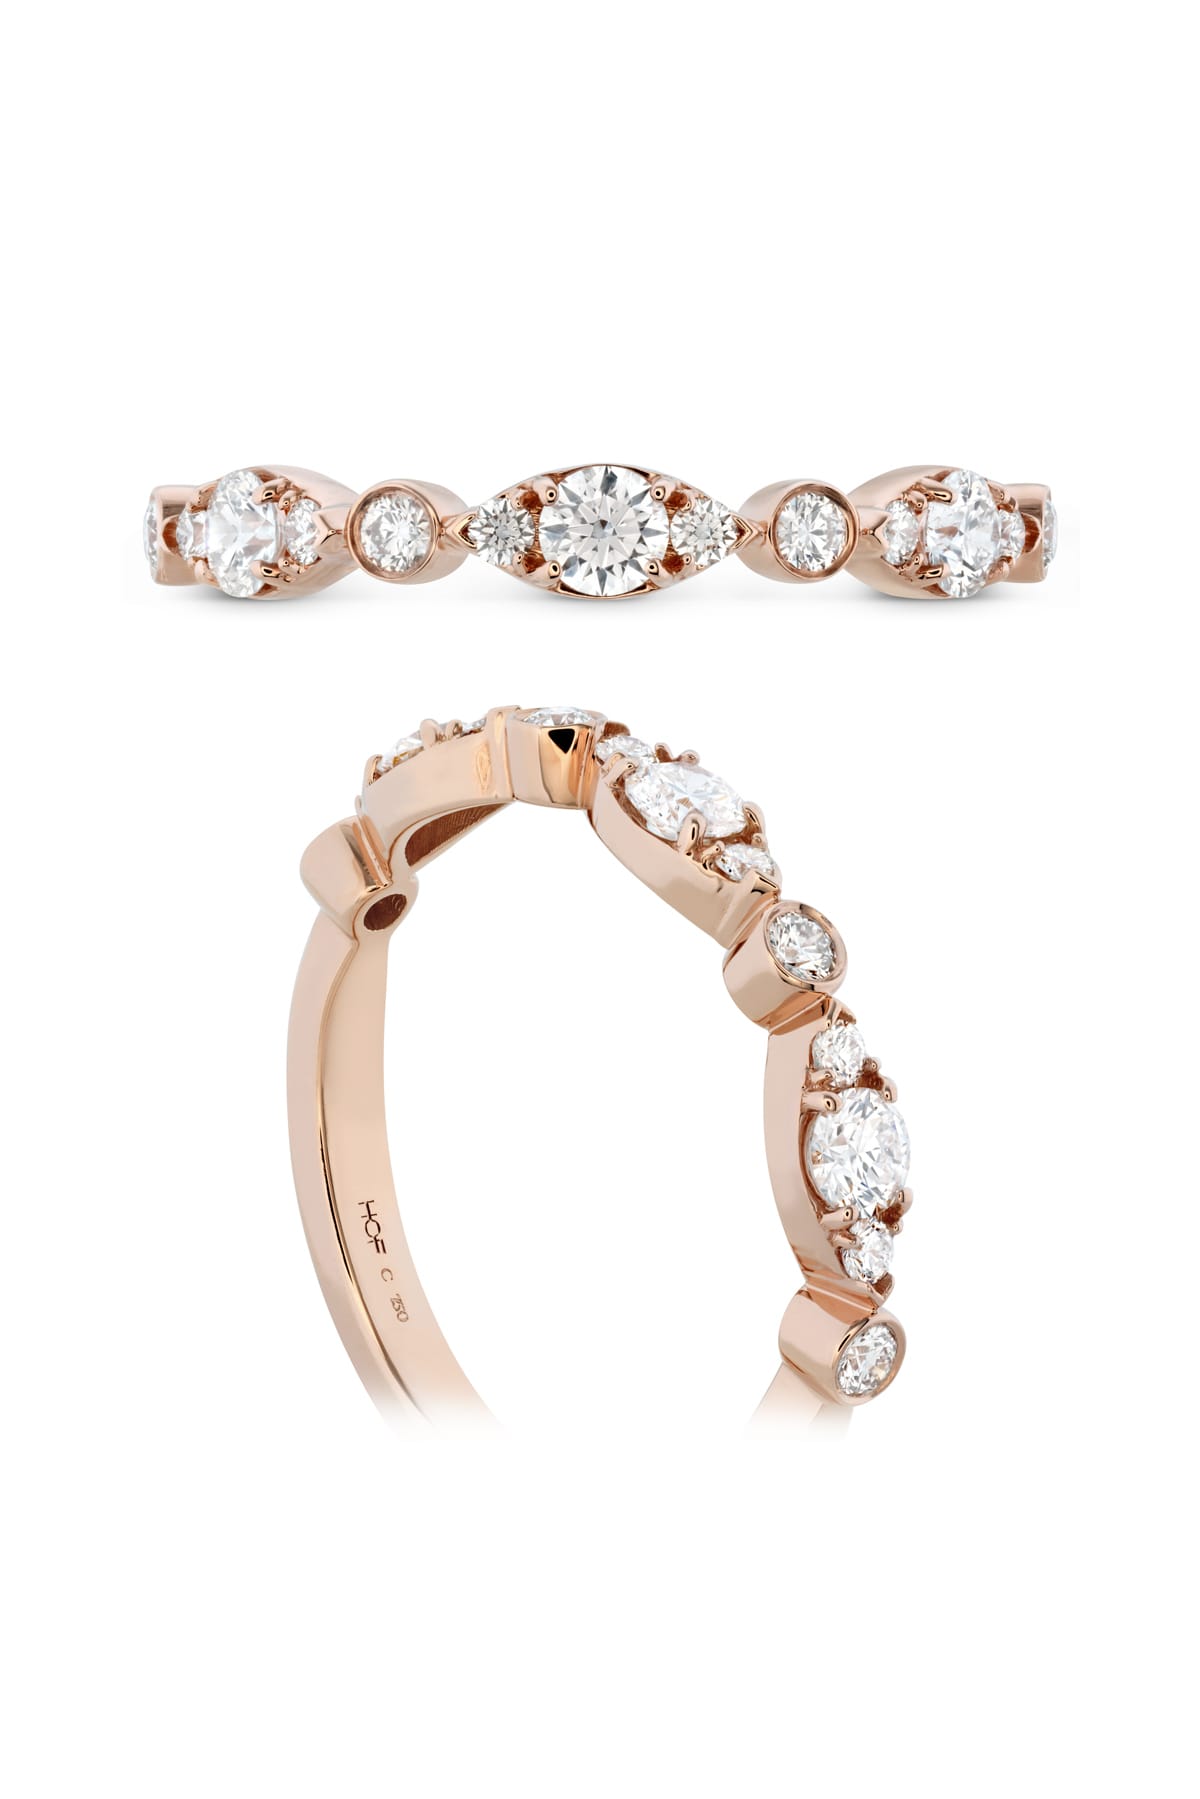 Bezel Regal Band From Hearts On Fire available at LeGassick Diamonds and Jewellery Gold Coast, Australia.